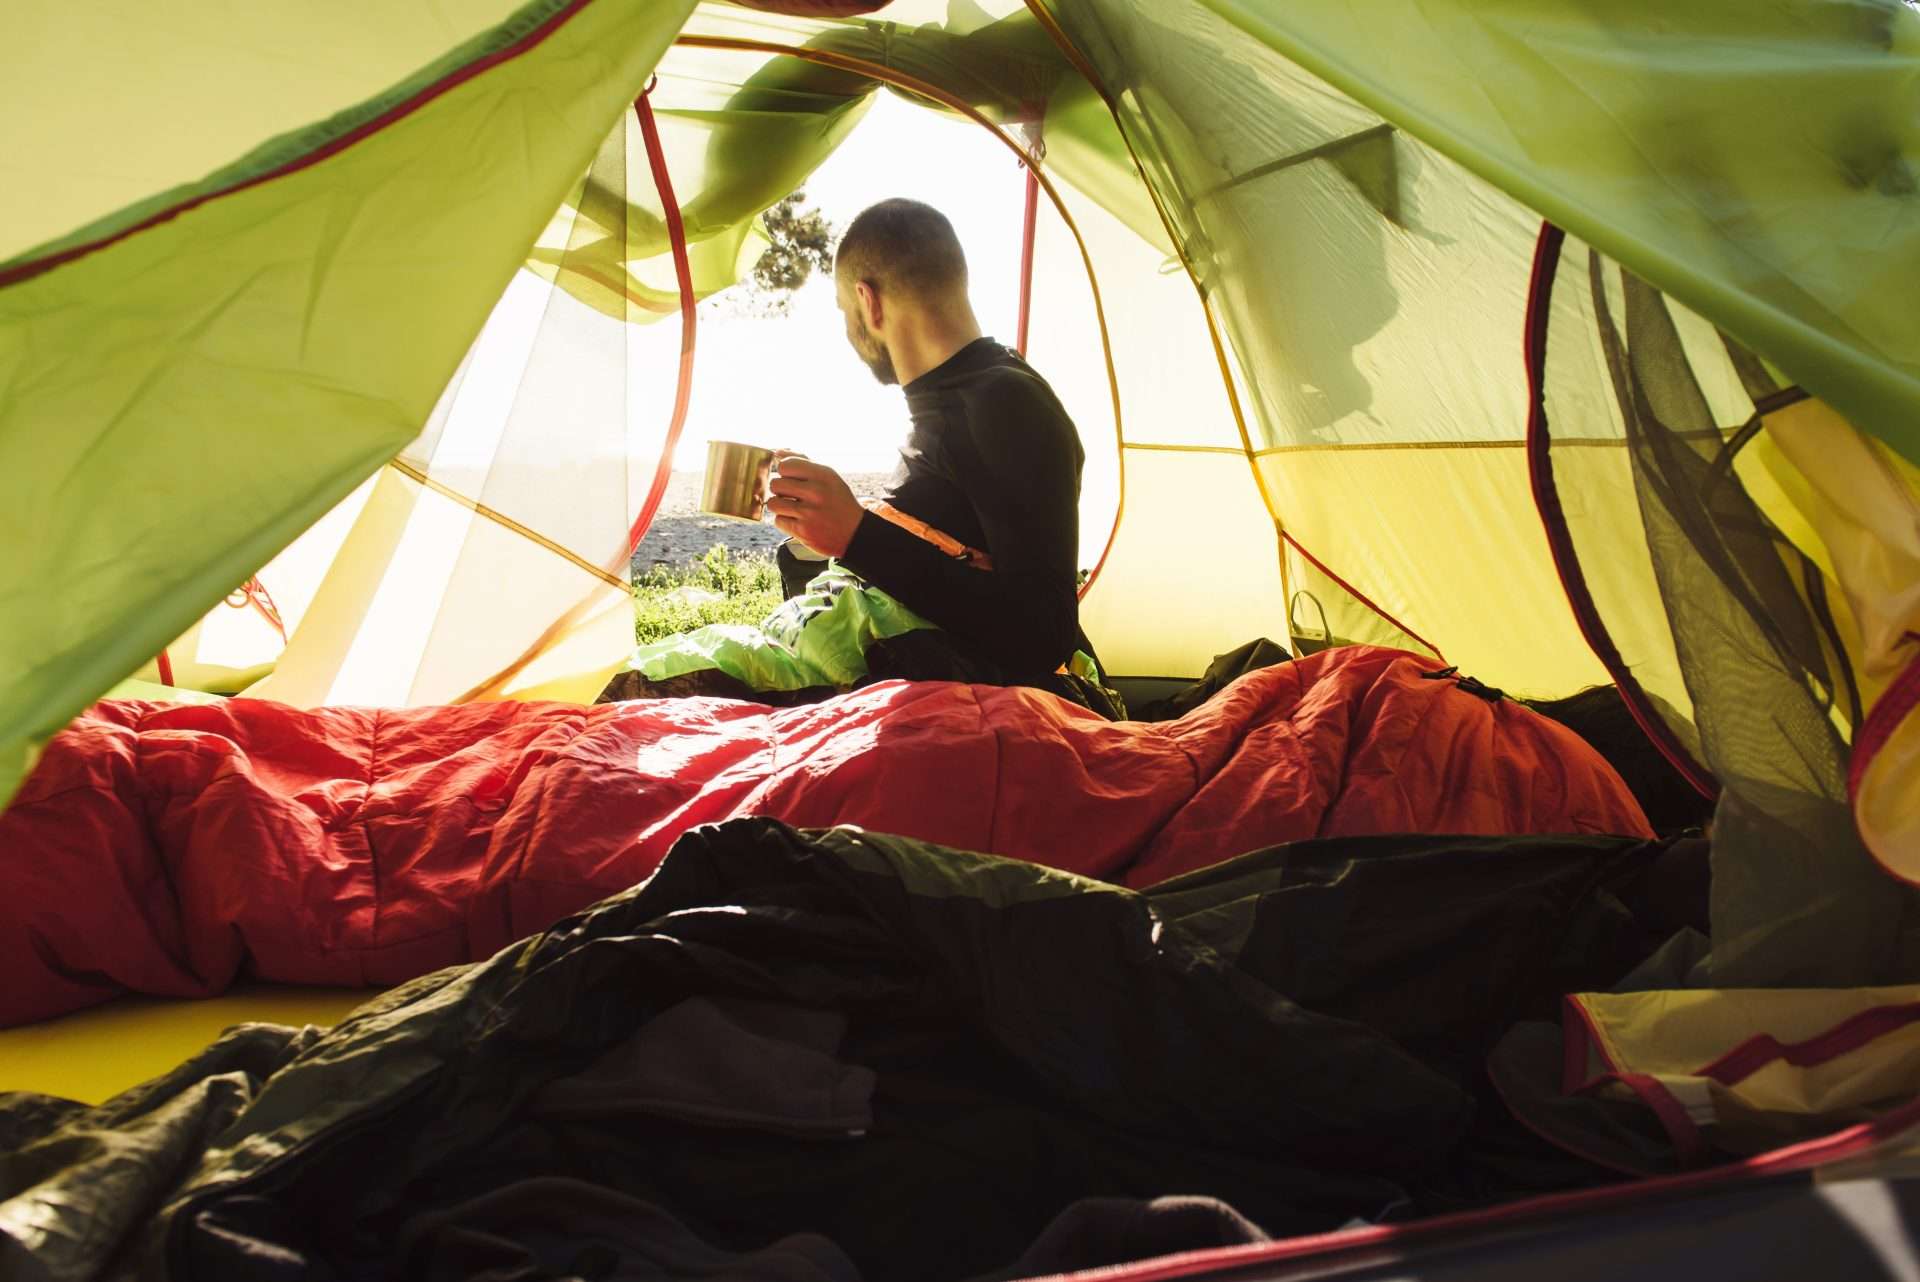 Man sitting in sleeping bag inside tent while using